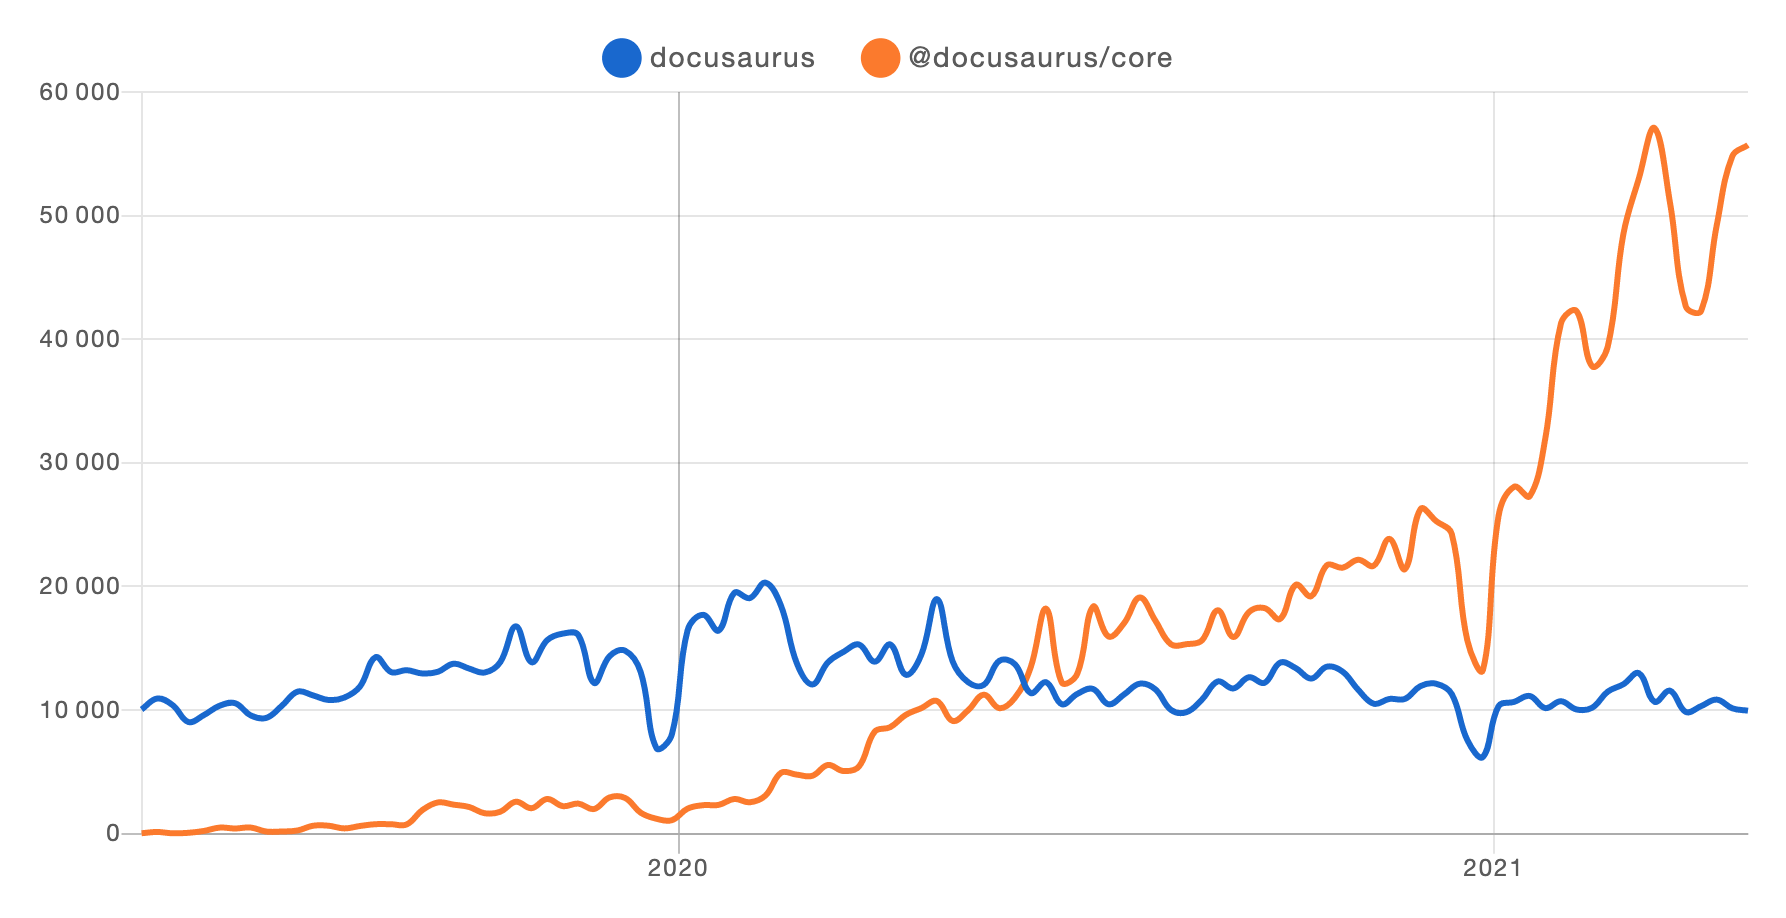 Docusaurus v1 vs. v2 npm trends from 2019 to mid 2021. Docusaurus v2 的安装陡升，而 v1 则是稳定版本。 V1 fluctuates between 10000 and 20000, while v2 starts at 0 and ends at almost 60000. The intersection happens around June 2020.